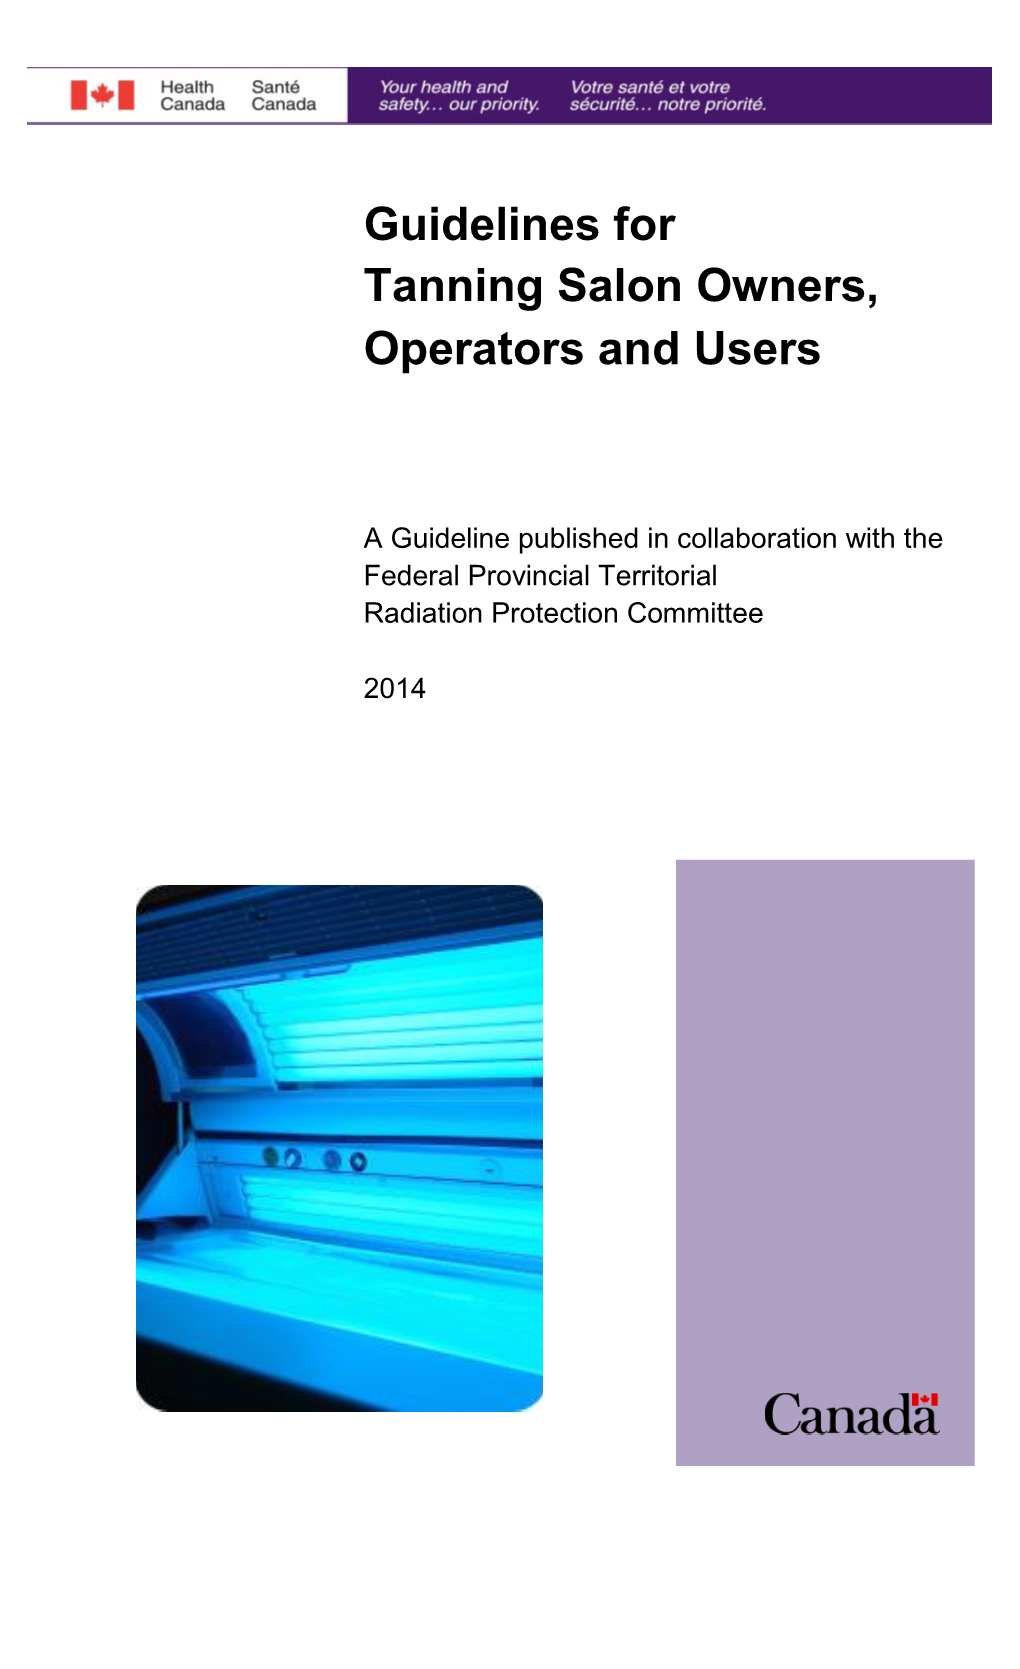 Guidelines for Tanning Salon Owners, Operators and Users 3